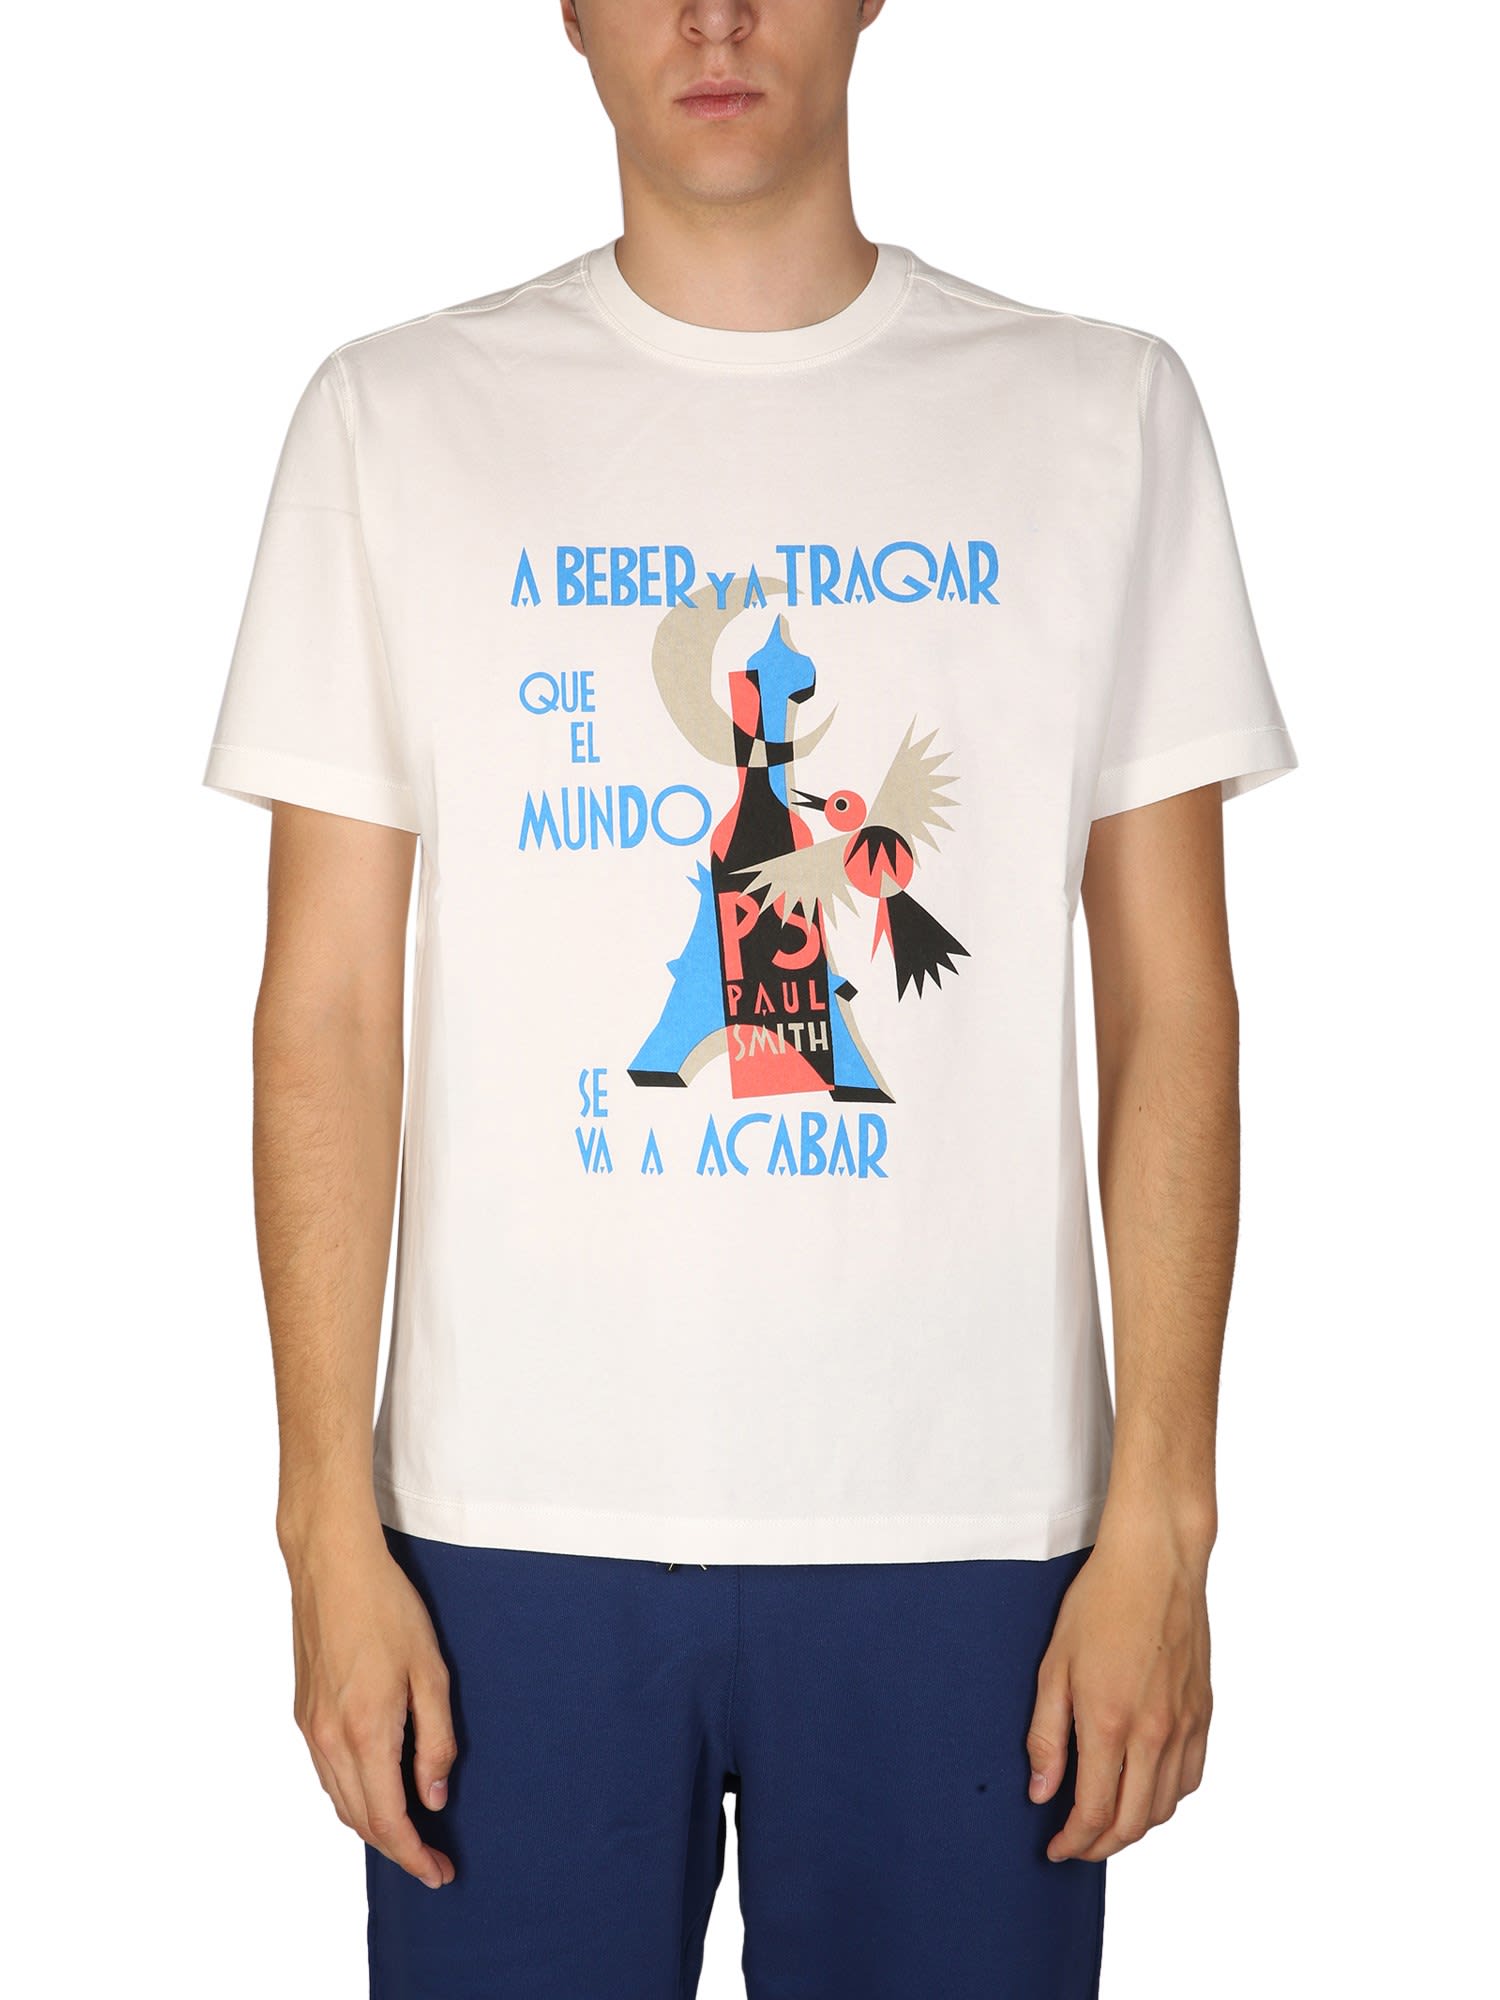 PS by Paul Smith T-shirt beber